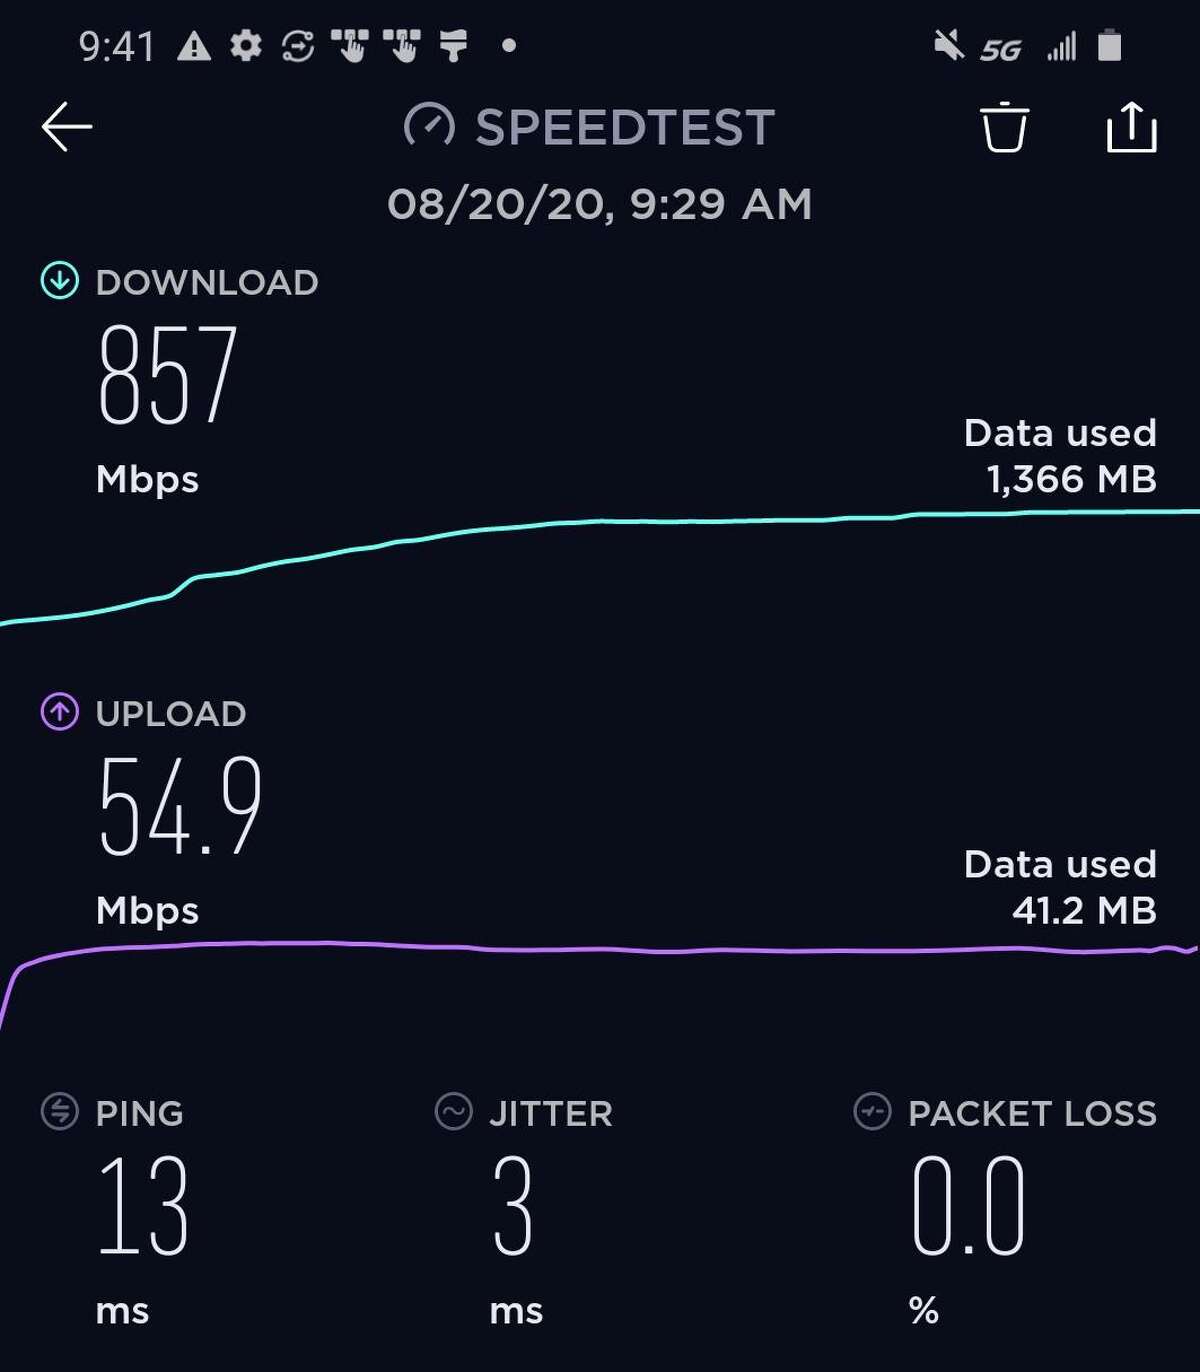 AT& 5G+ network can be found at the corner of La Branch and Polk streets, in front of the Toyota Center. This result was obtained on Aug. 20, 2020, on a Samsung Galaxy S20+ 5G smartphone, using the Ookla Speedtest app.